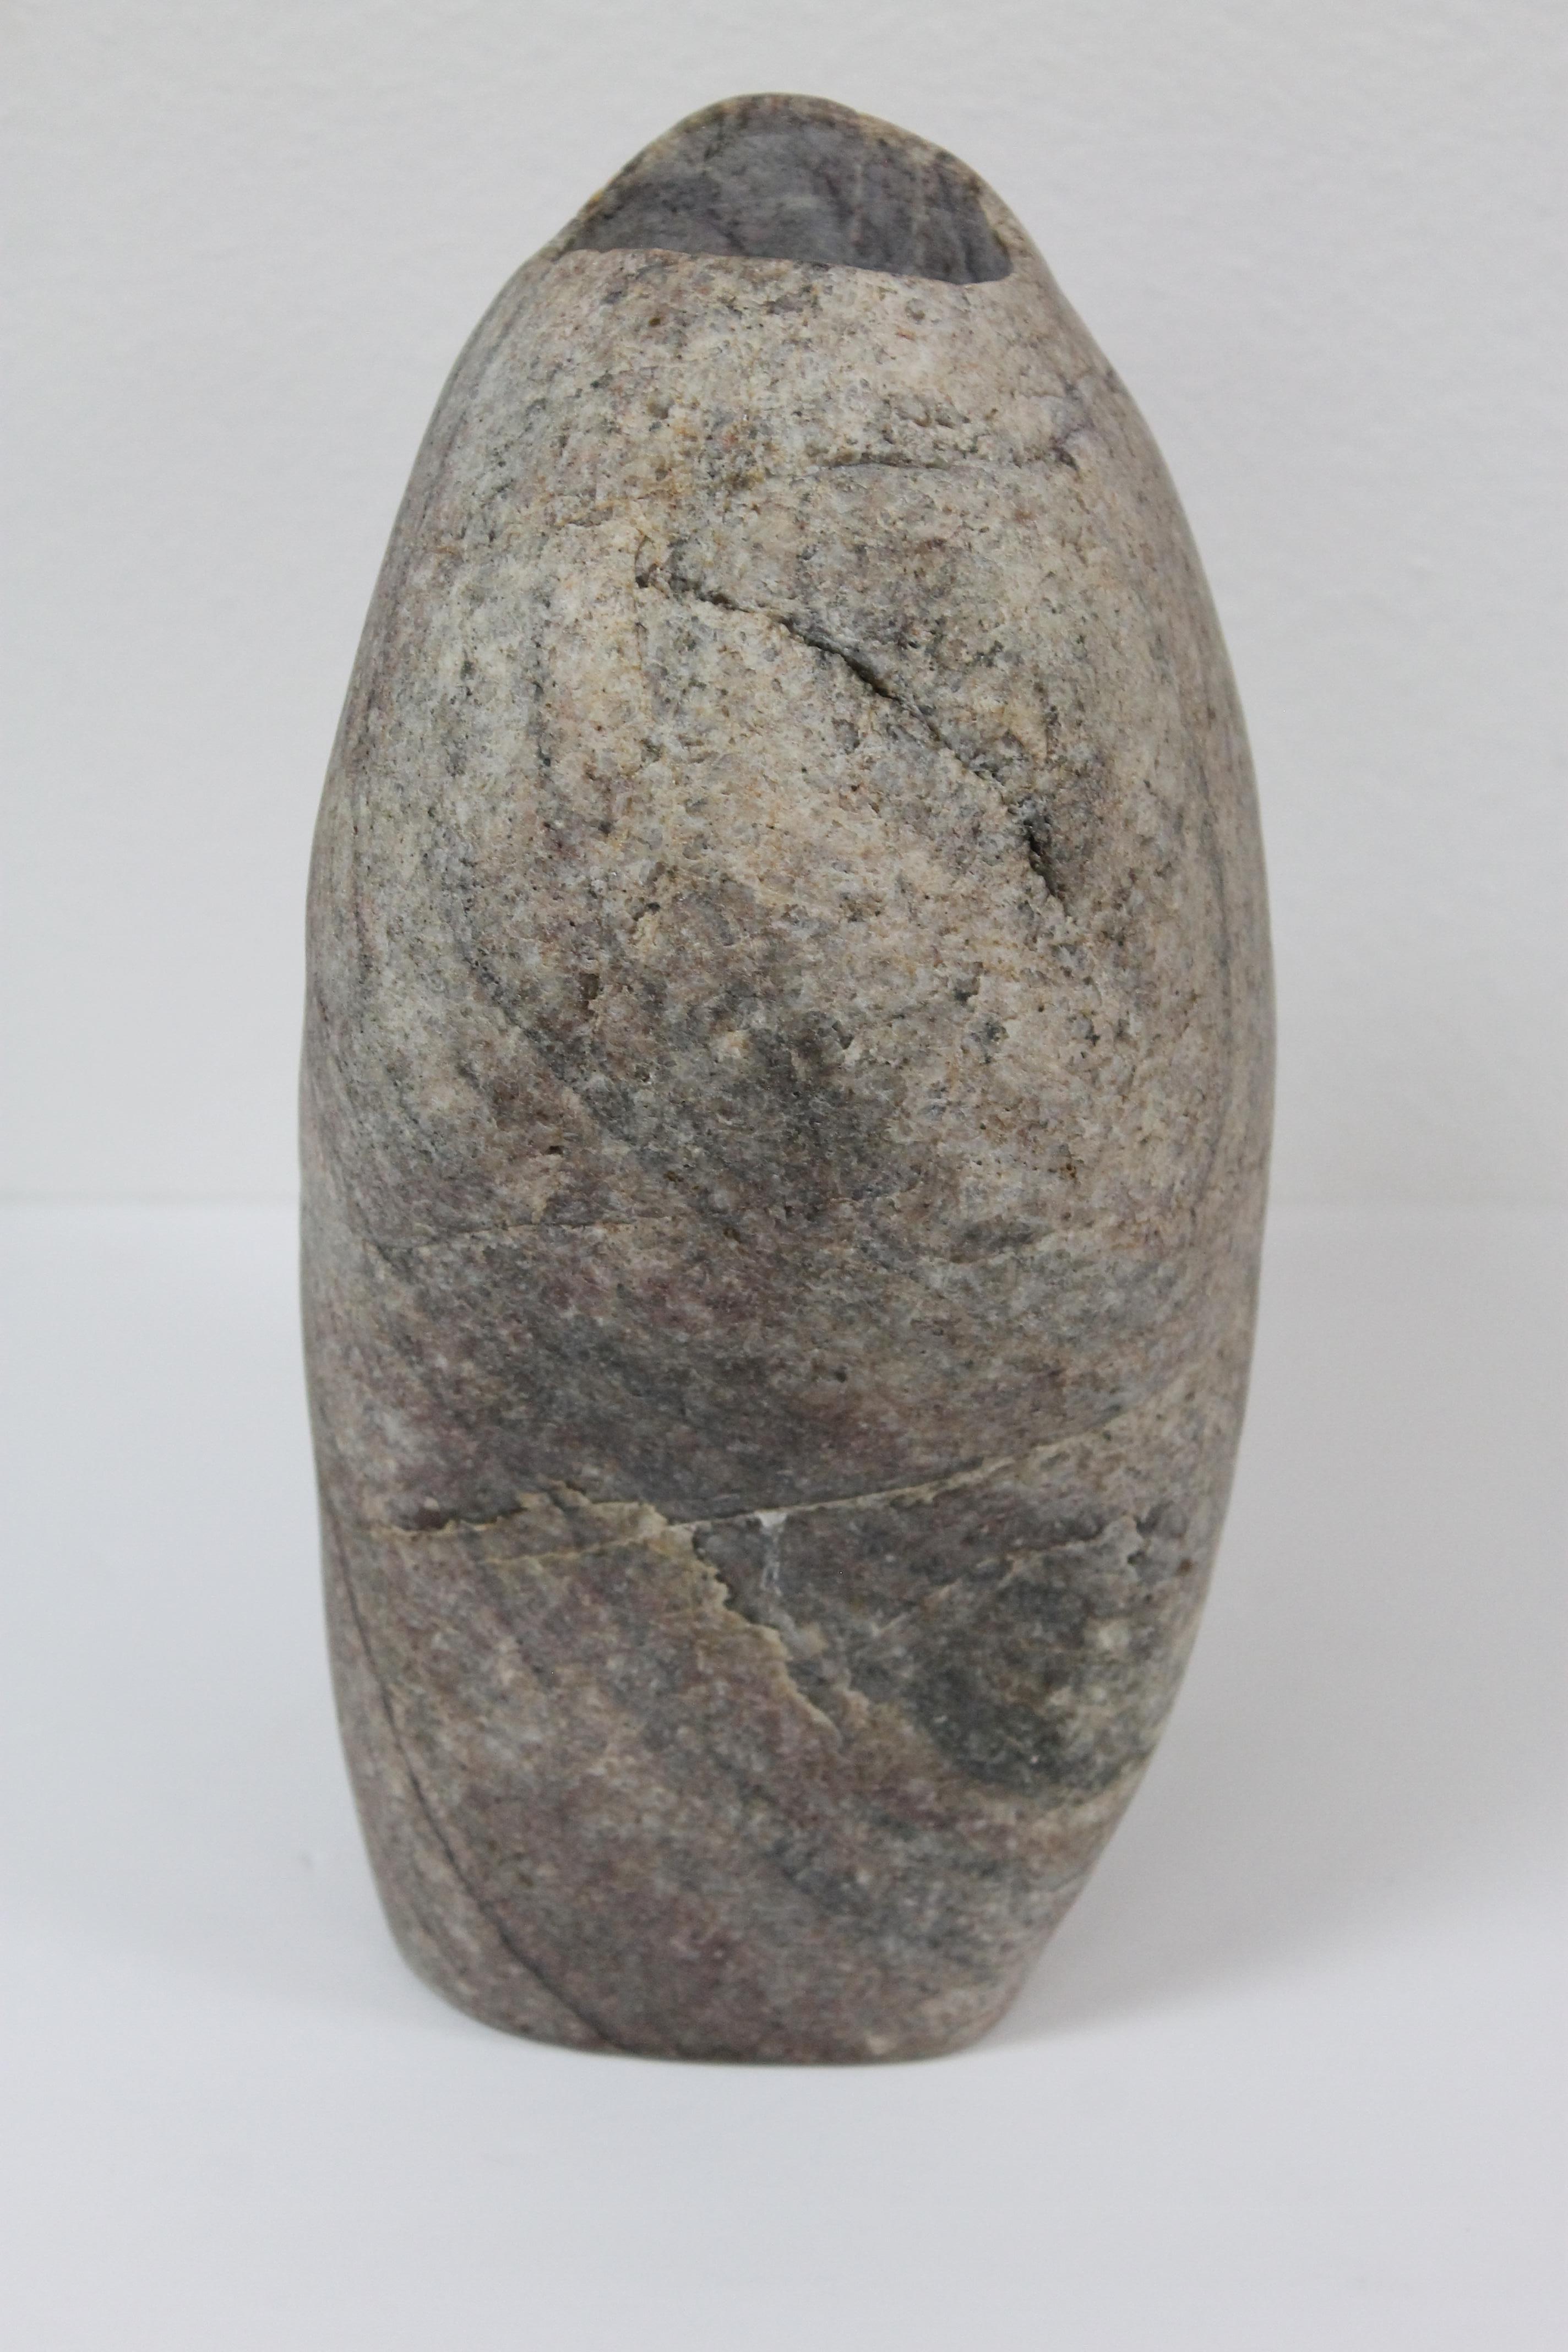 Solid stone vase. We've been using it for displaying flowers. Vase measures 8.5